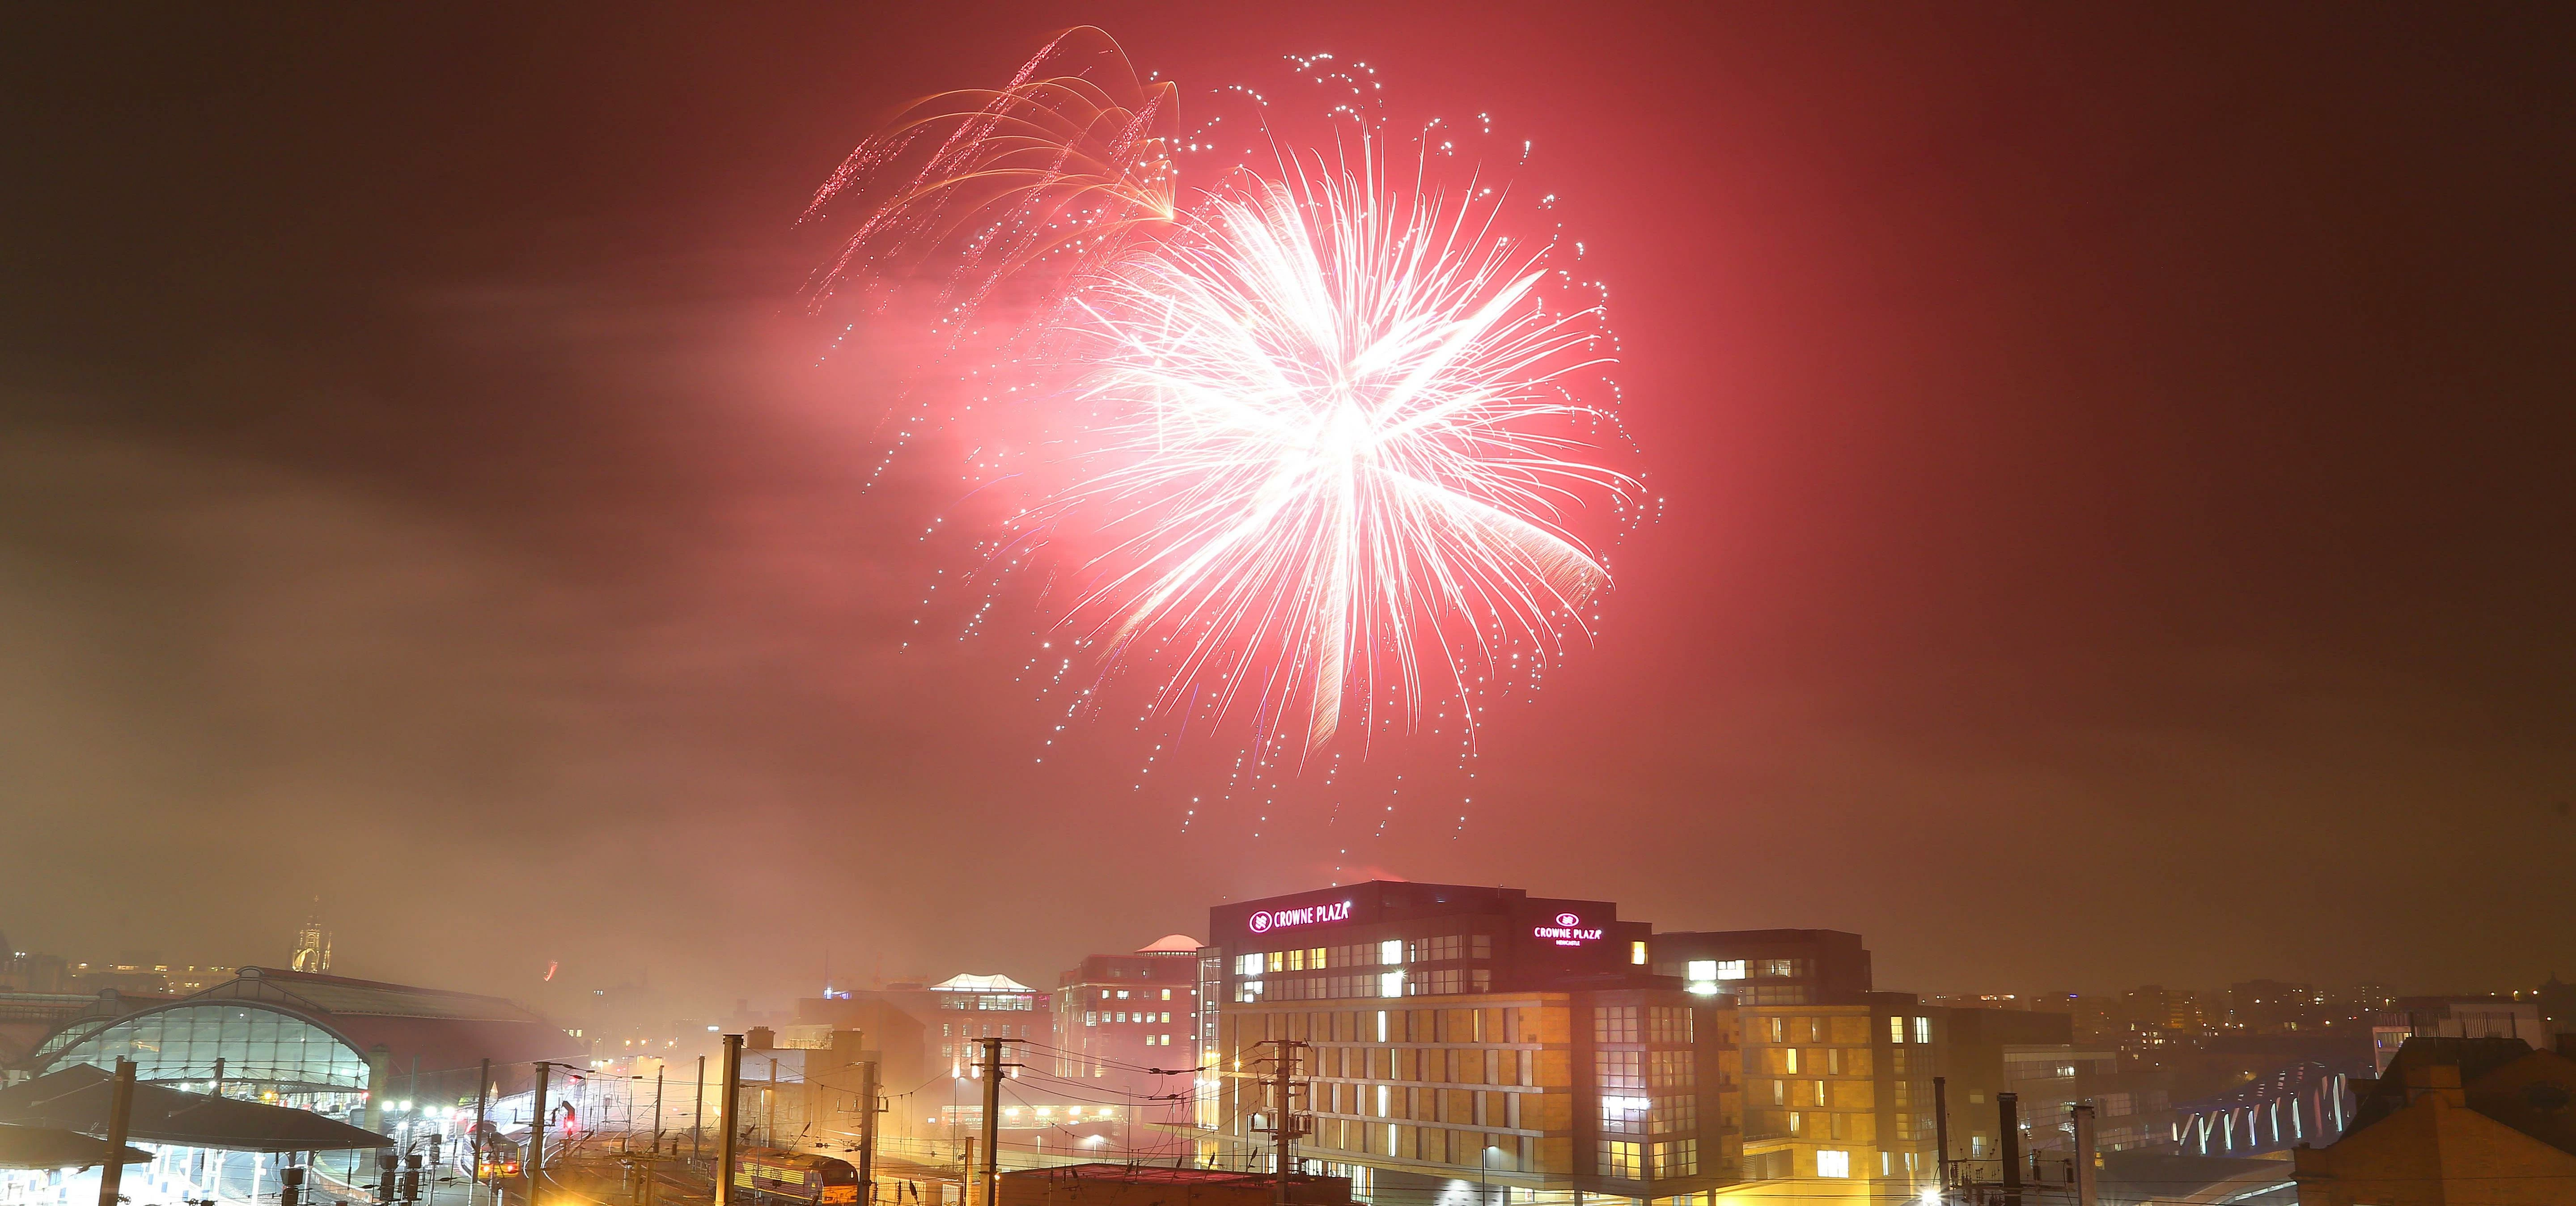 Fireworks mark the official opening of the Crowne Plaza Newcastle - Stephenson Quarter 